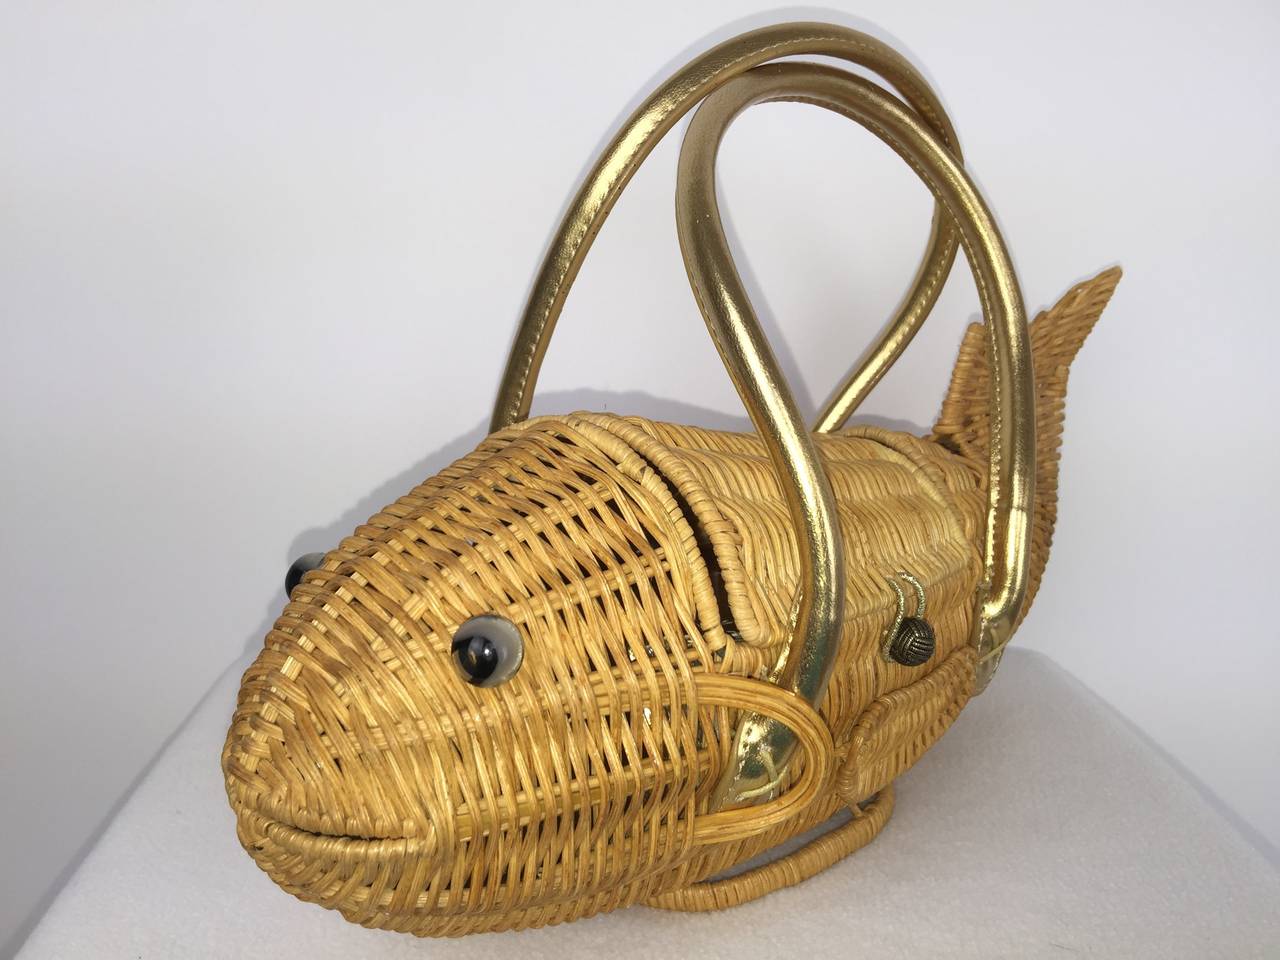 Adorable little wicker fish bag.  

Gold faux leather straps.  

Wonderful, shy smile on her face !

Excellent condition inside and out.

Size:

13 inches from tail to nose.
9 inches tall including handle.
5.5 inches tall excluding the